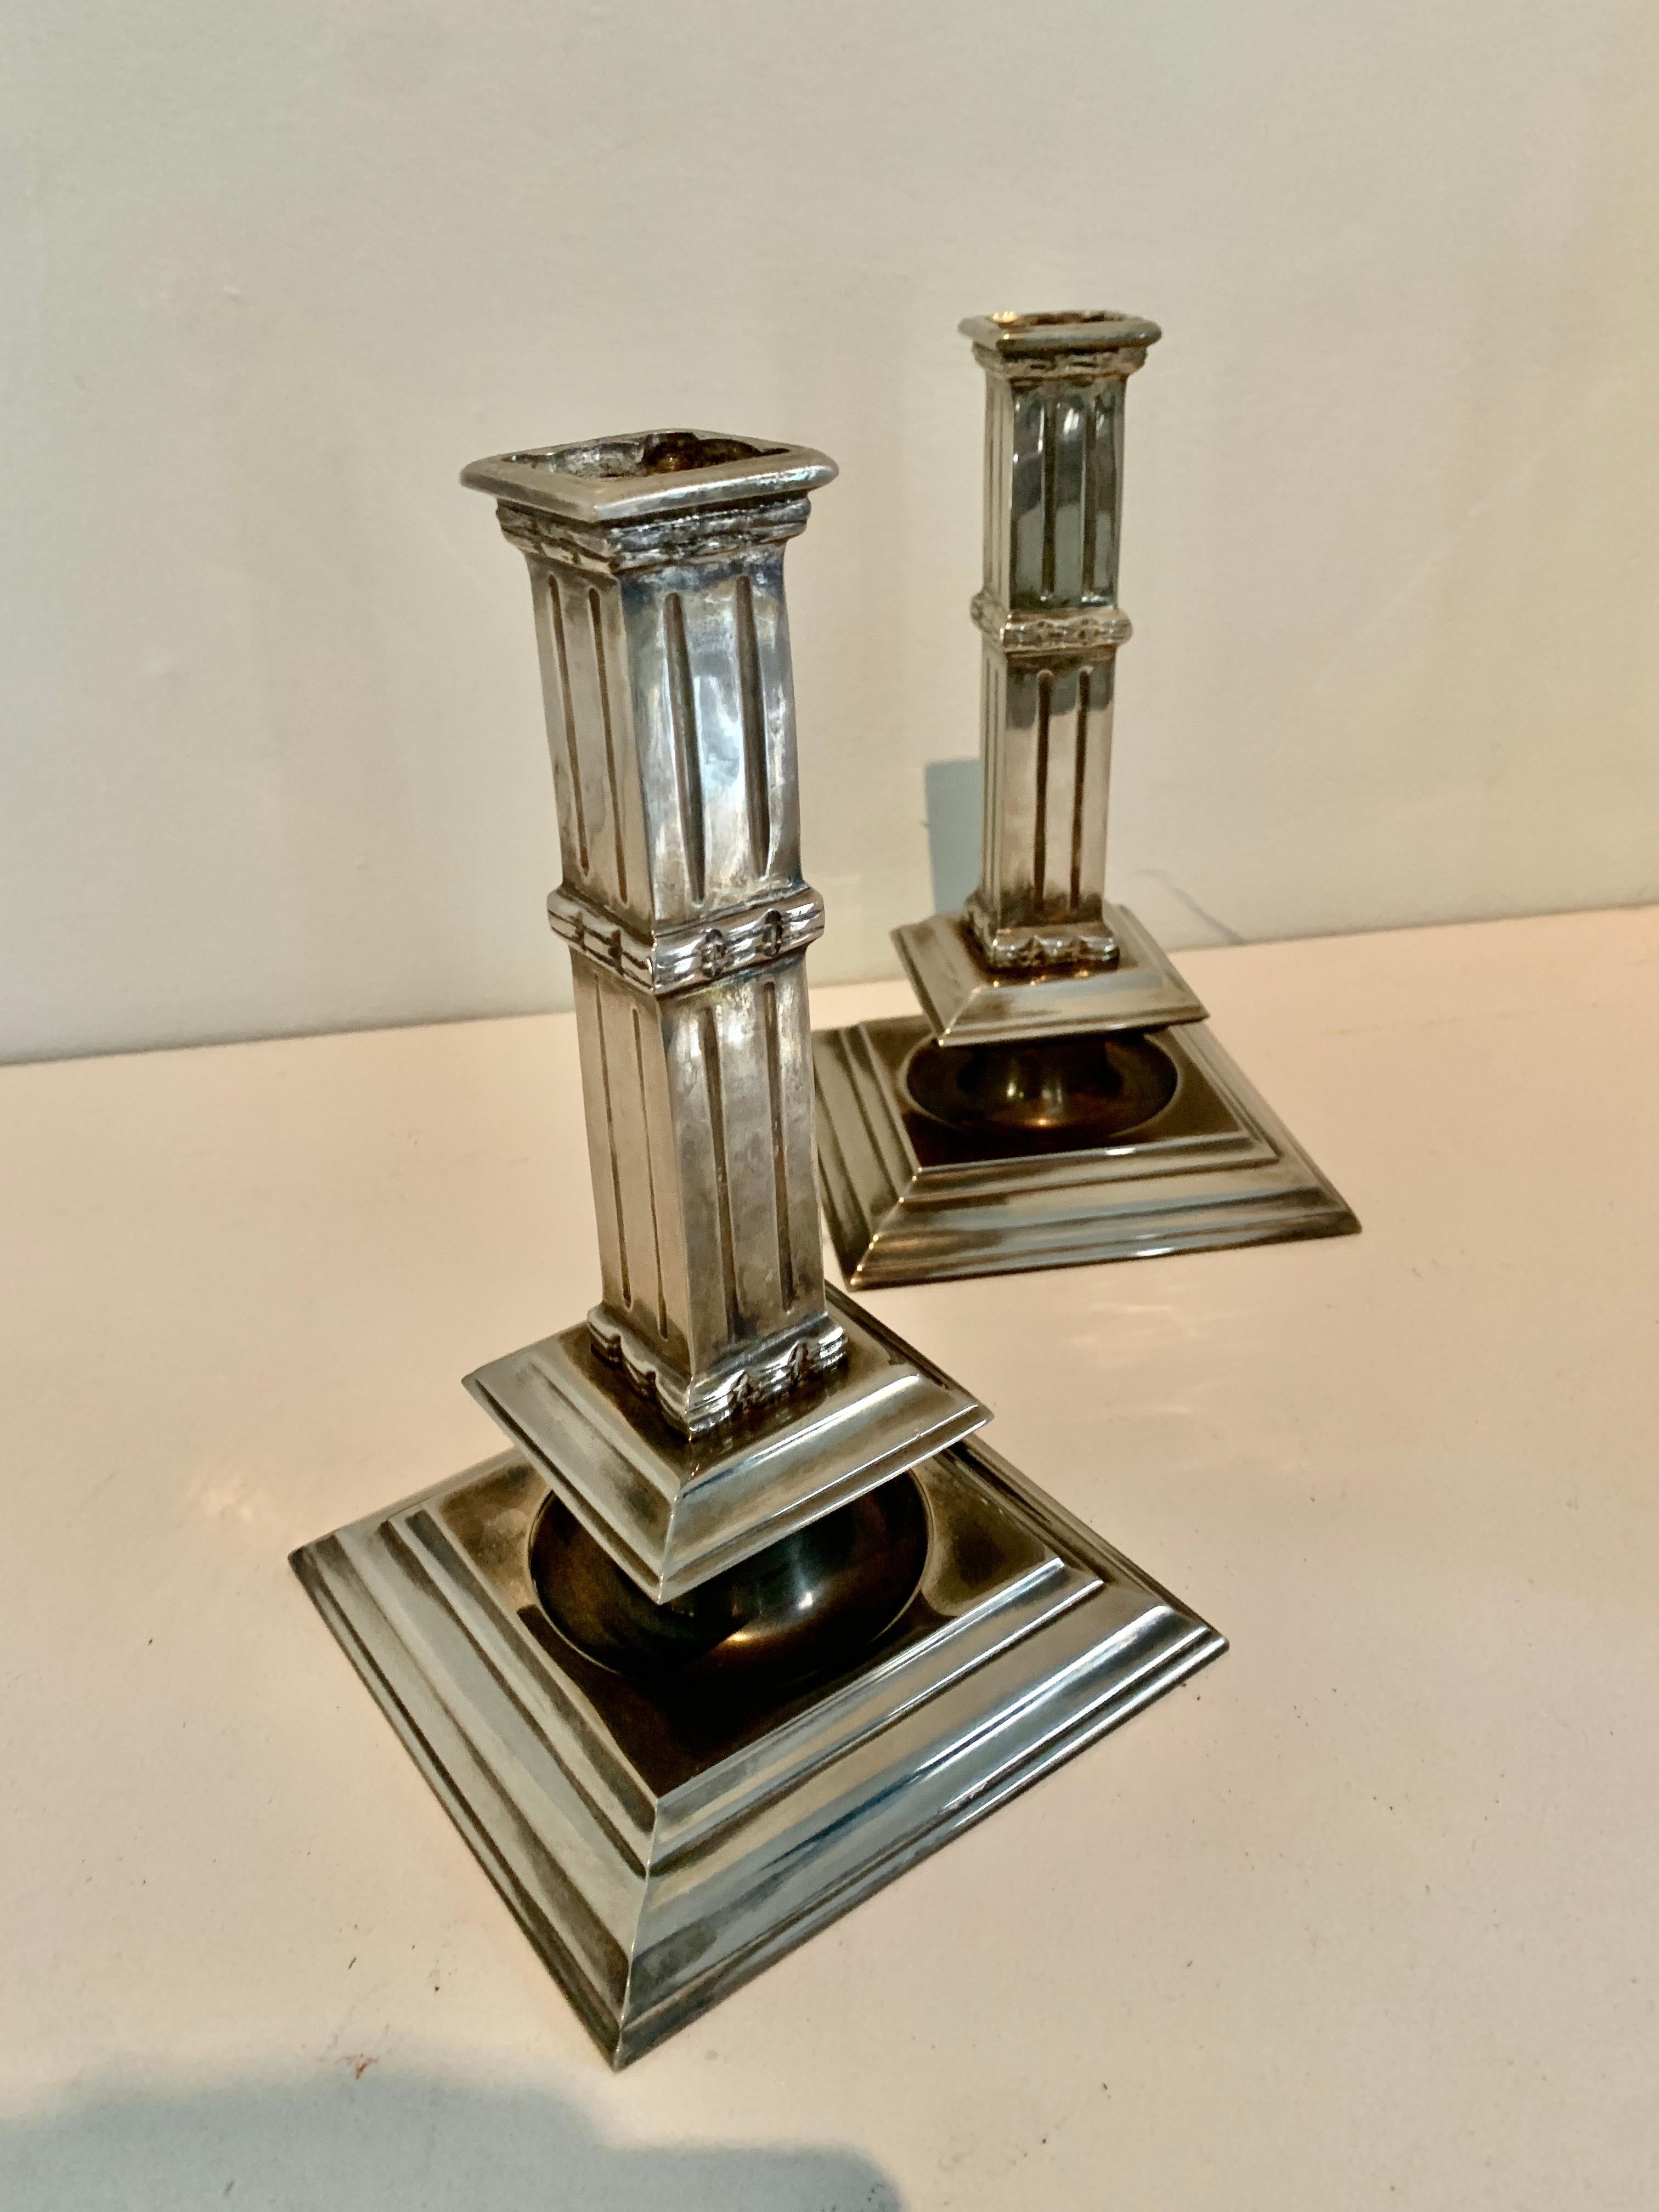 A wonderfully architectural Pair of silver plate candlesticks - the pair are reminiscent of columns and are a compliment to any dining table, mantle or console. The finish is a polished silver with great depth. Exquisite, simple and